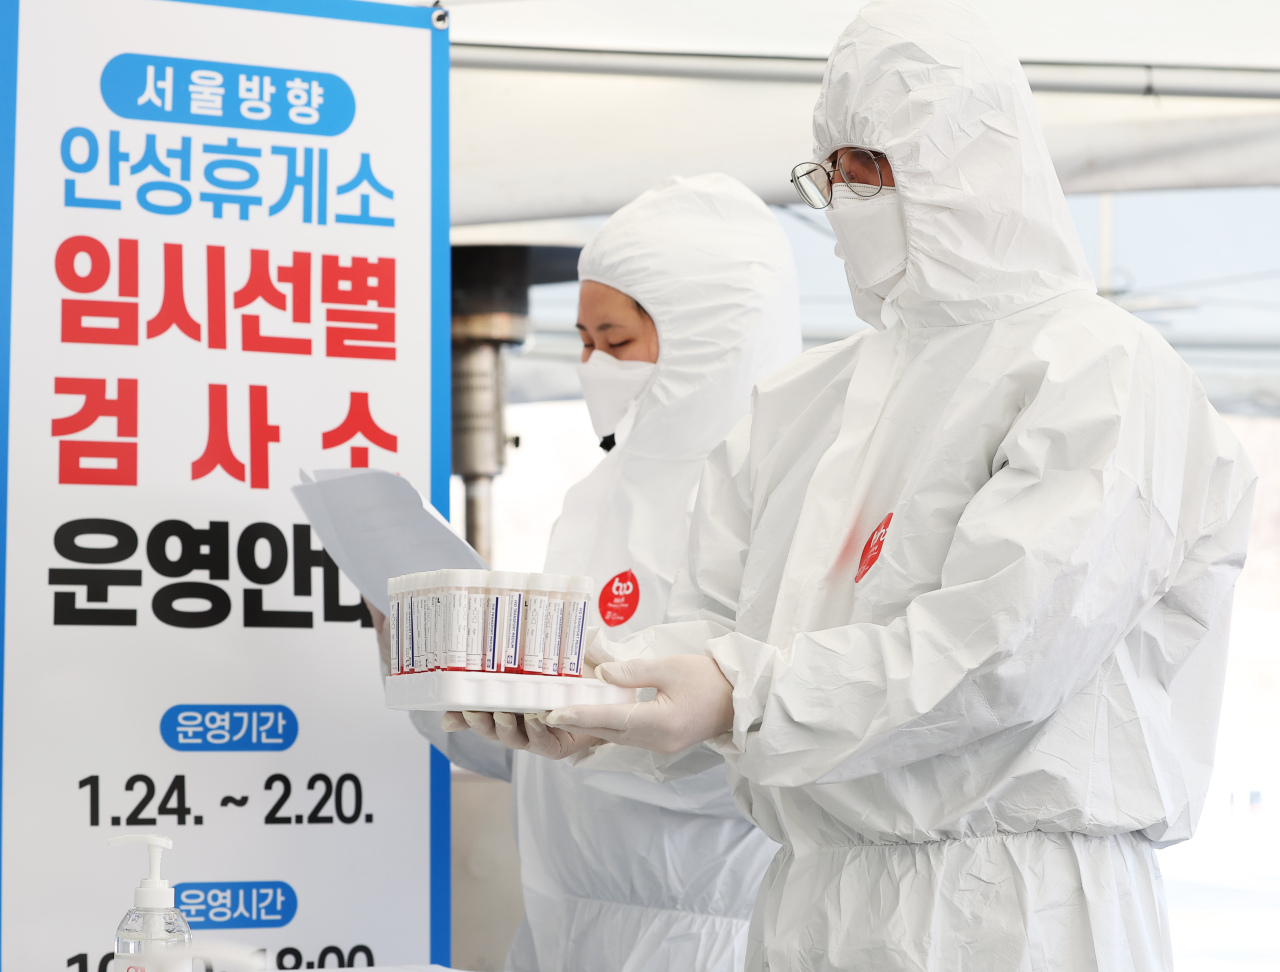 Medical professionals run a COVID-19 testing site in Gyeonggi Province on Monday. (Yonhap)